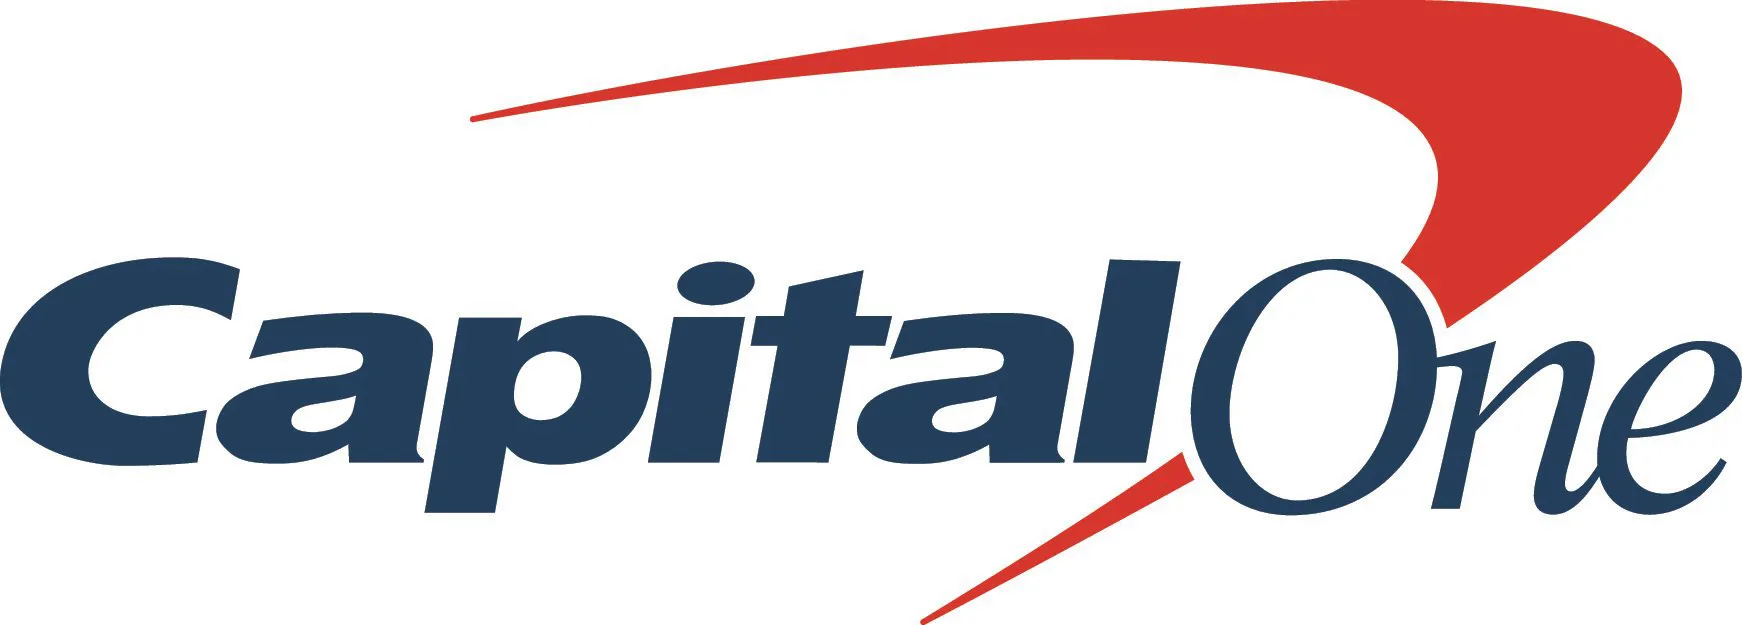 Capital One 360 Checking